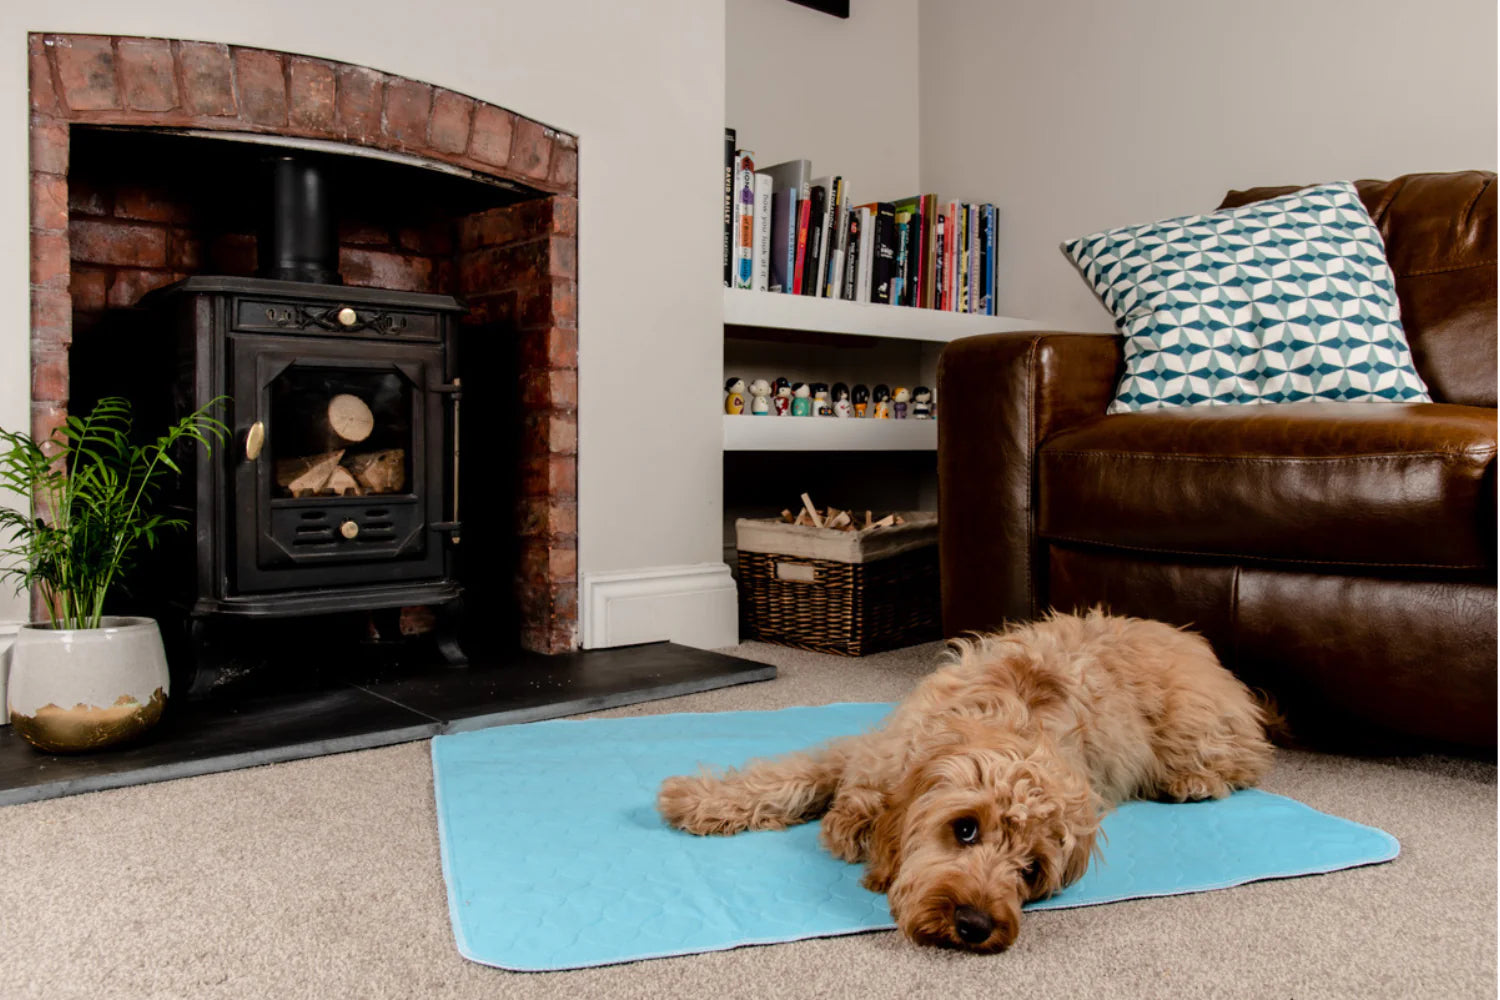 A dog lying down on a sky blue washable puppy pad, in a living room setting